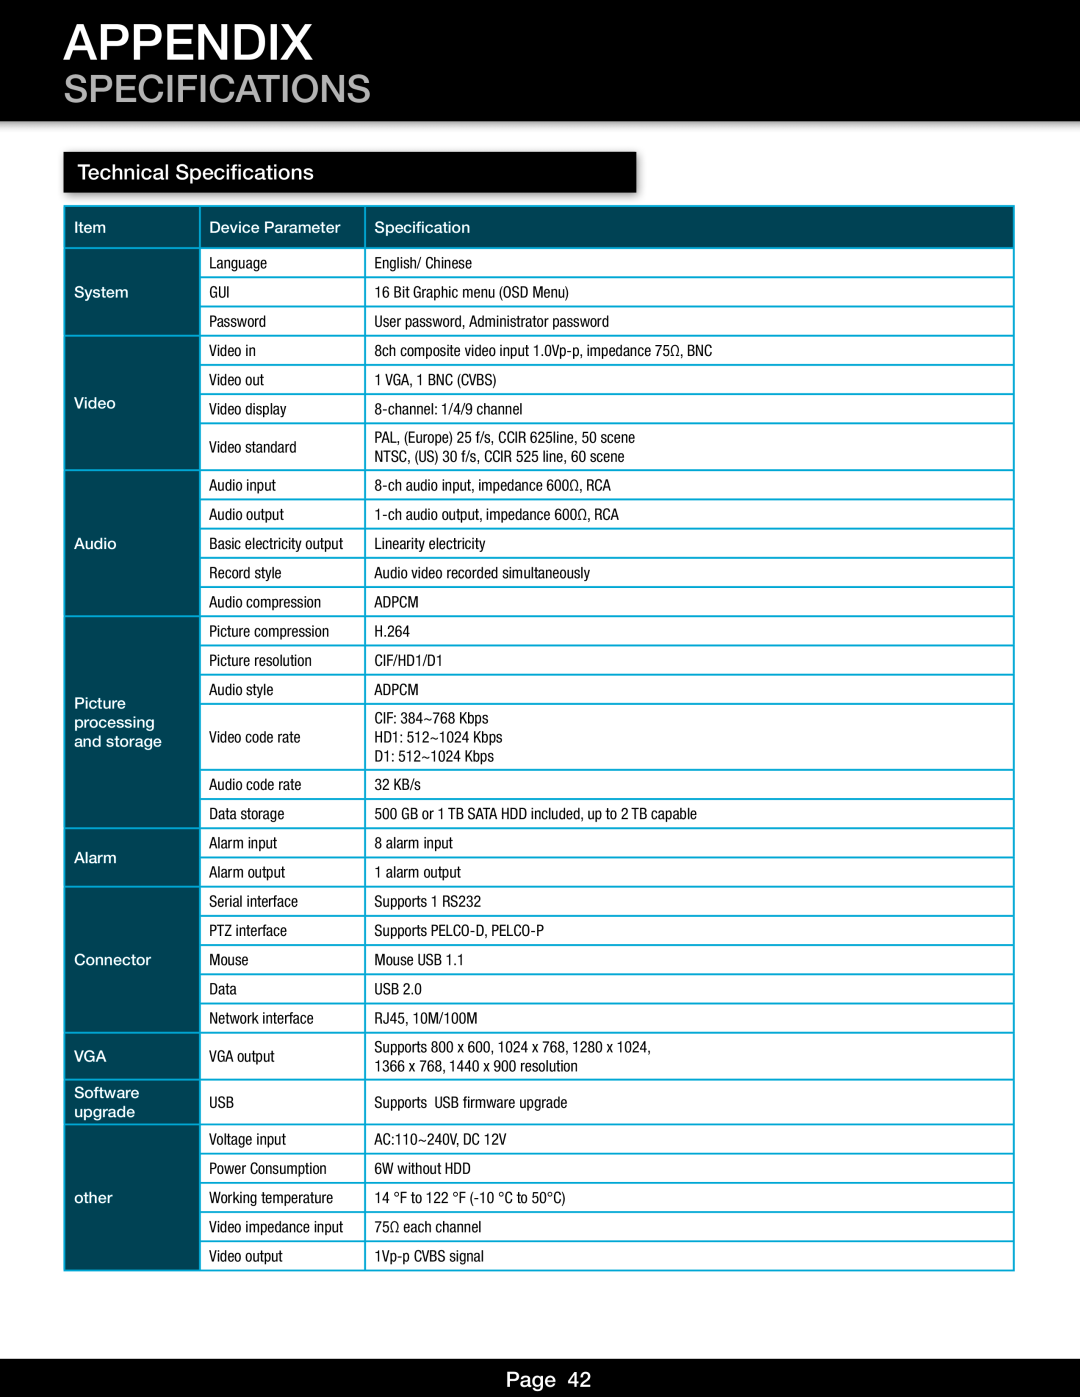 First Alert DVR0805, DVR0810 user manual Appendix, Technical Specifications, Page 